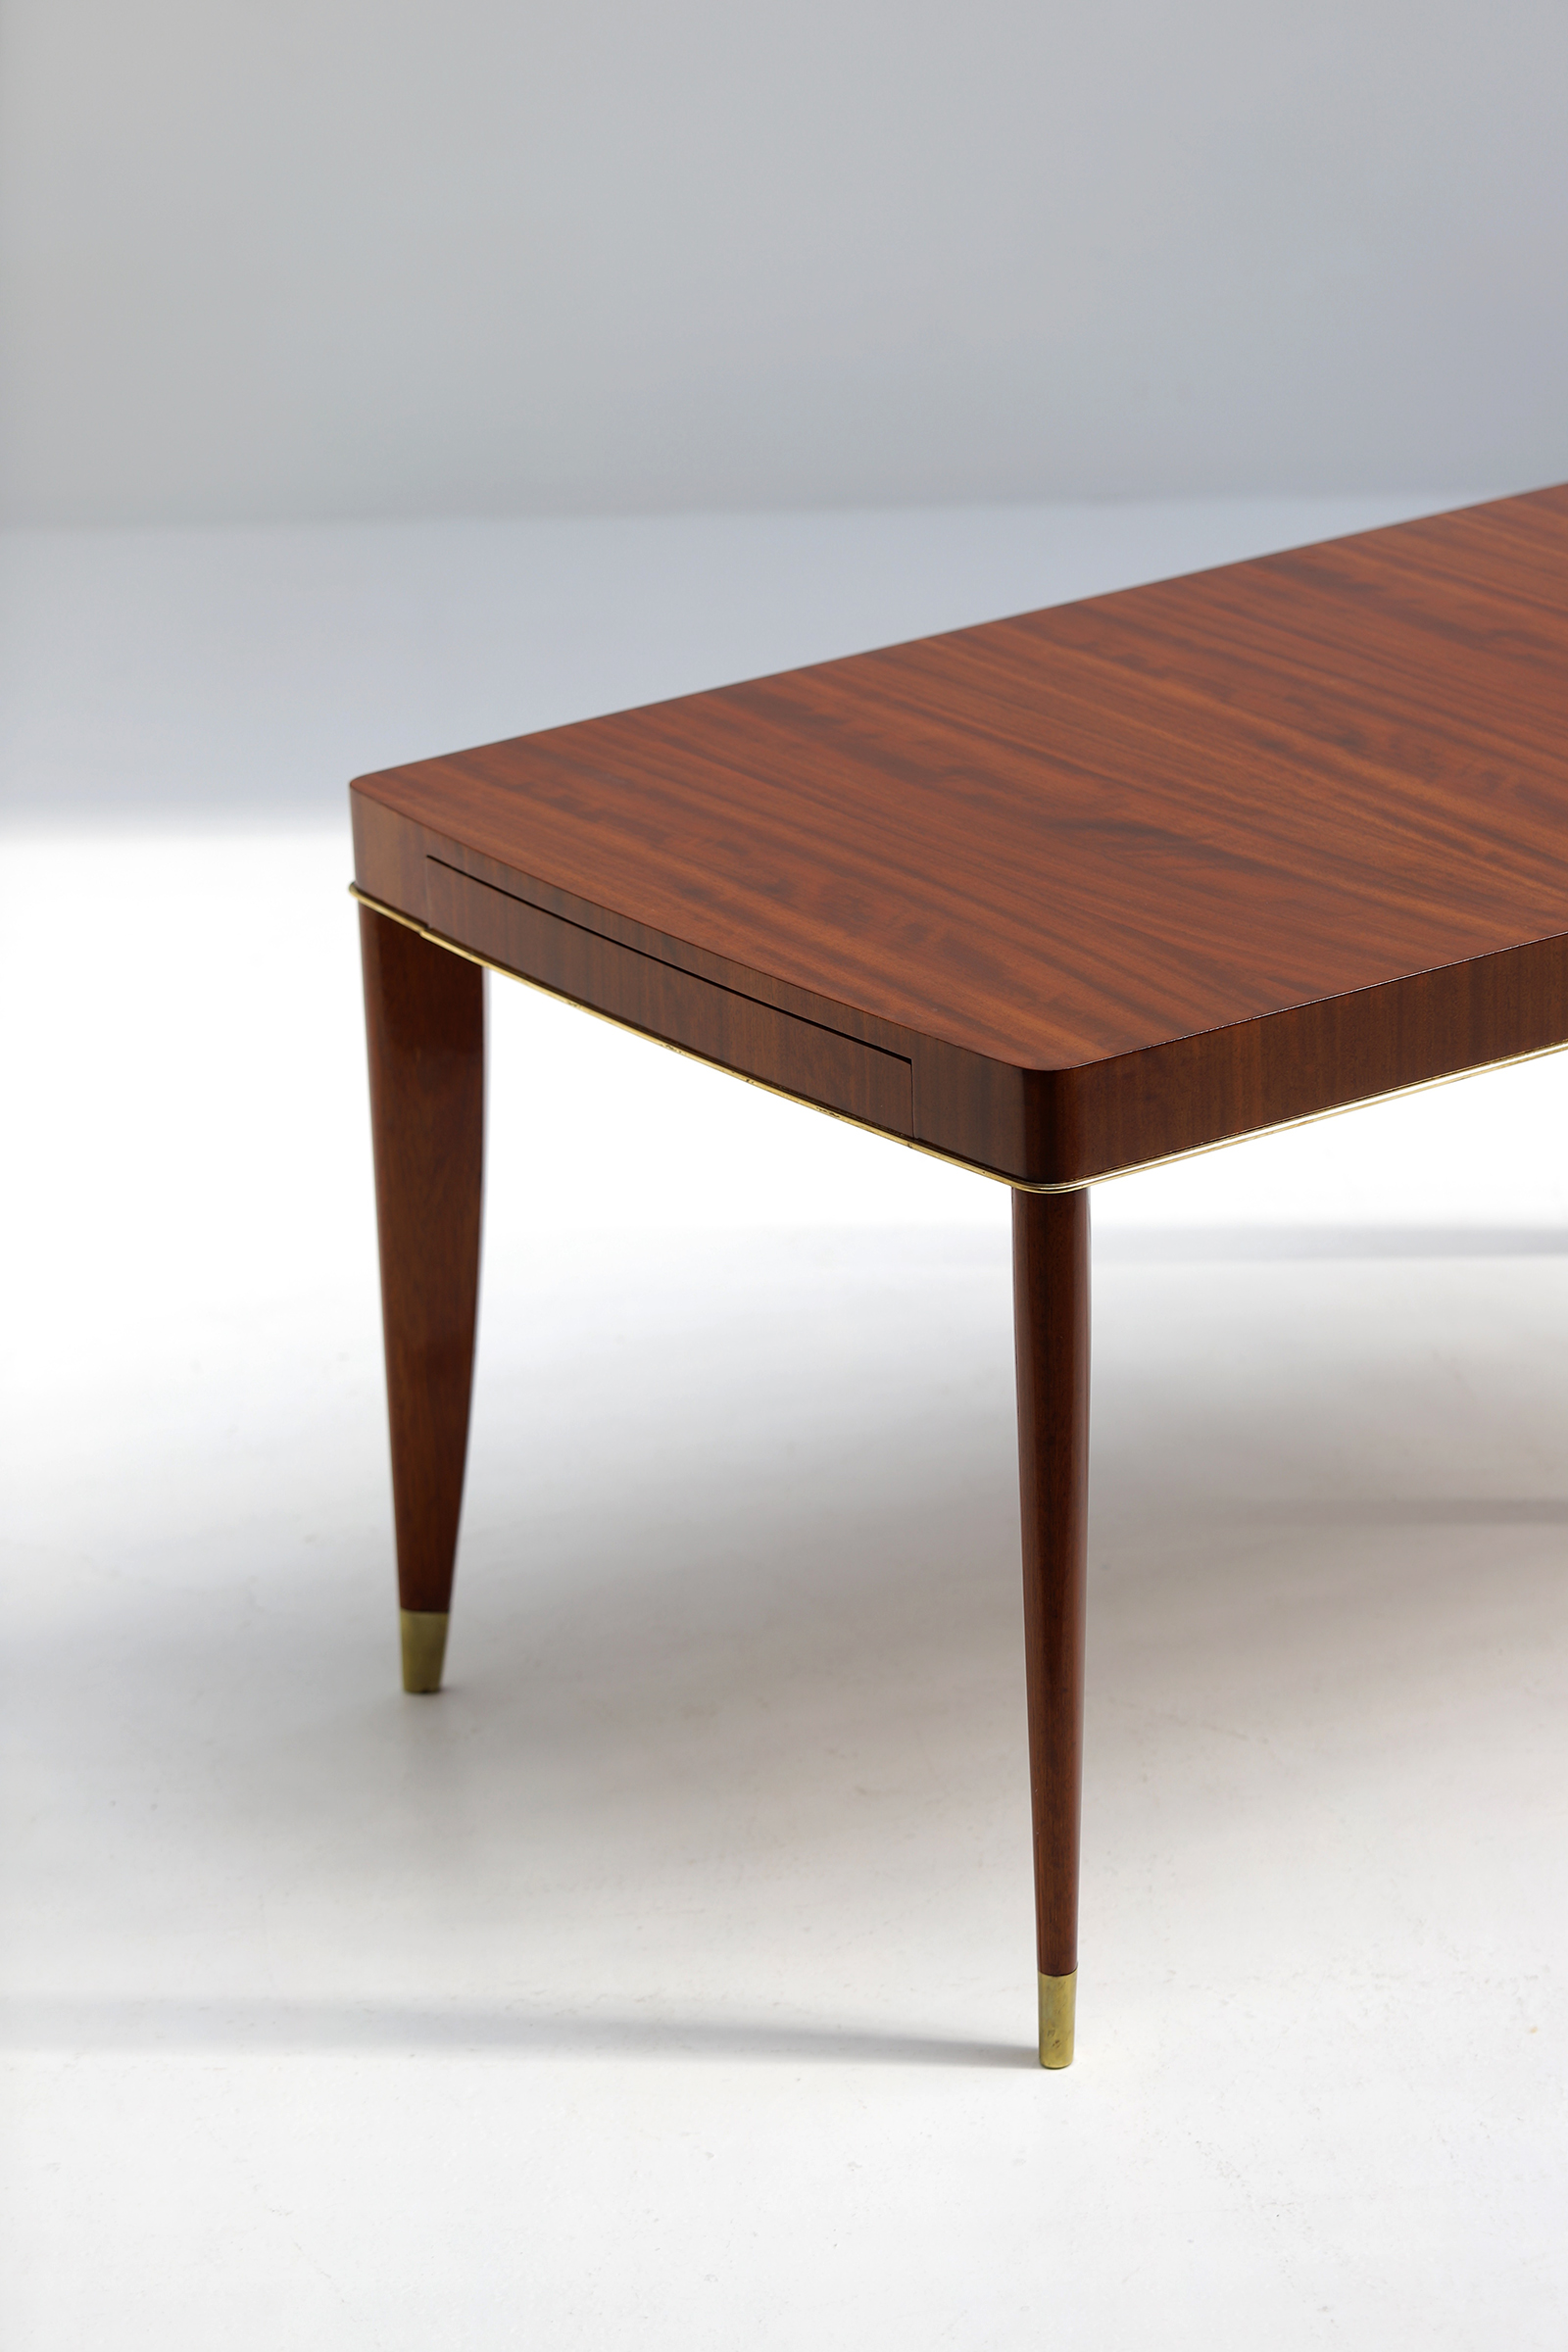 De Coene Dining Voltaire Table 1930simage 6